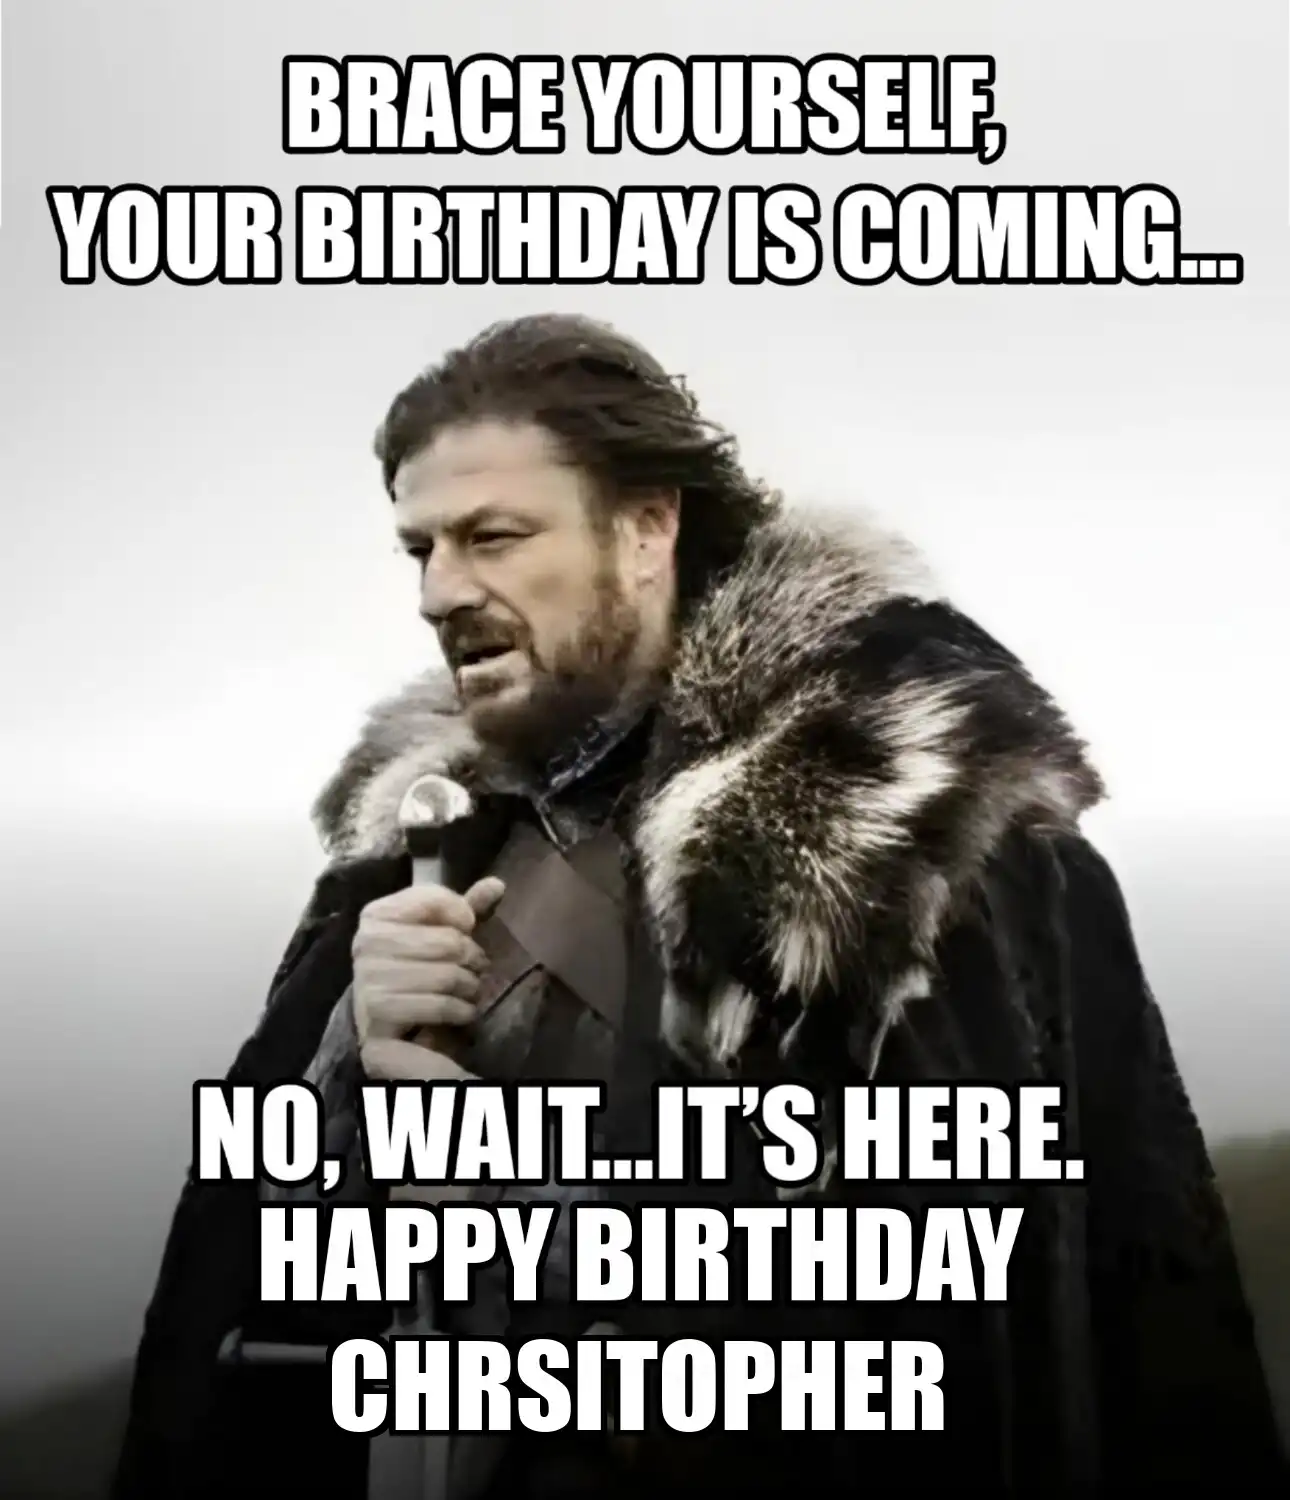 Happy Birthday Chrsitopher Brace Yourself Your Birthday Is Coming Meme